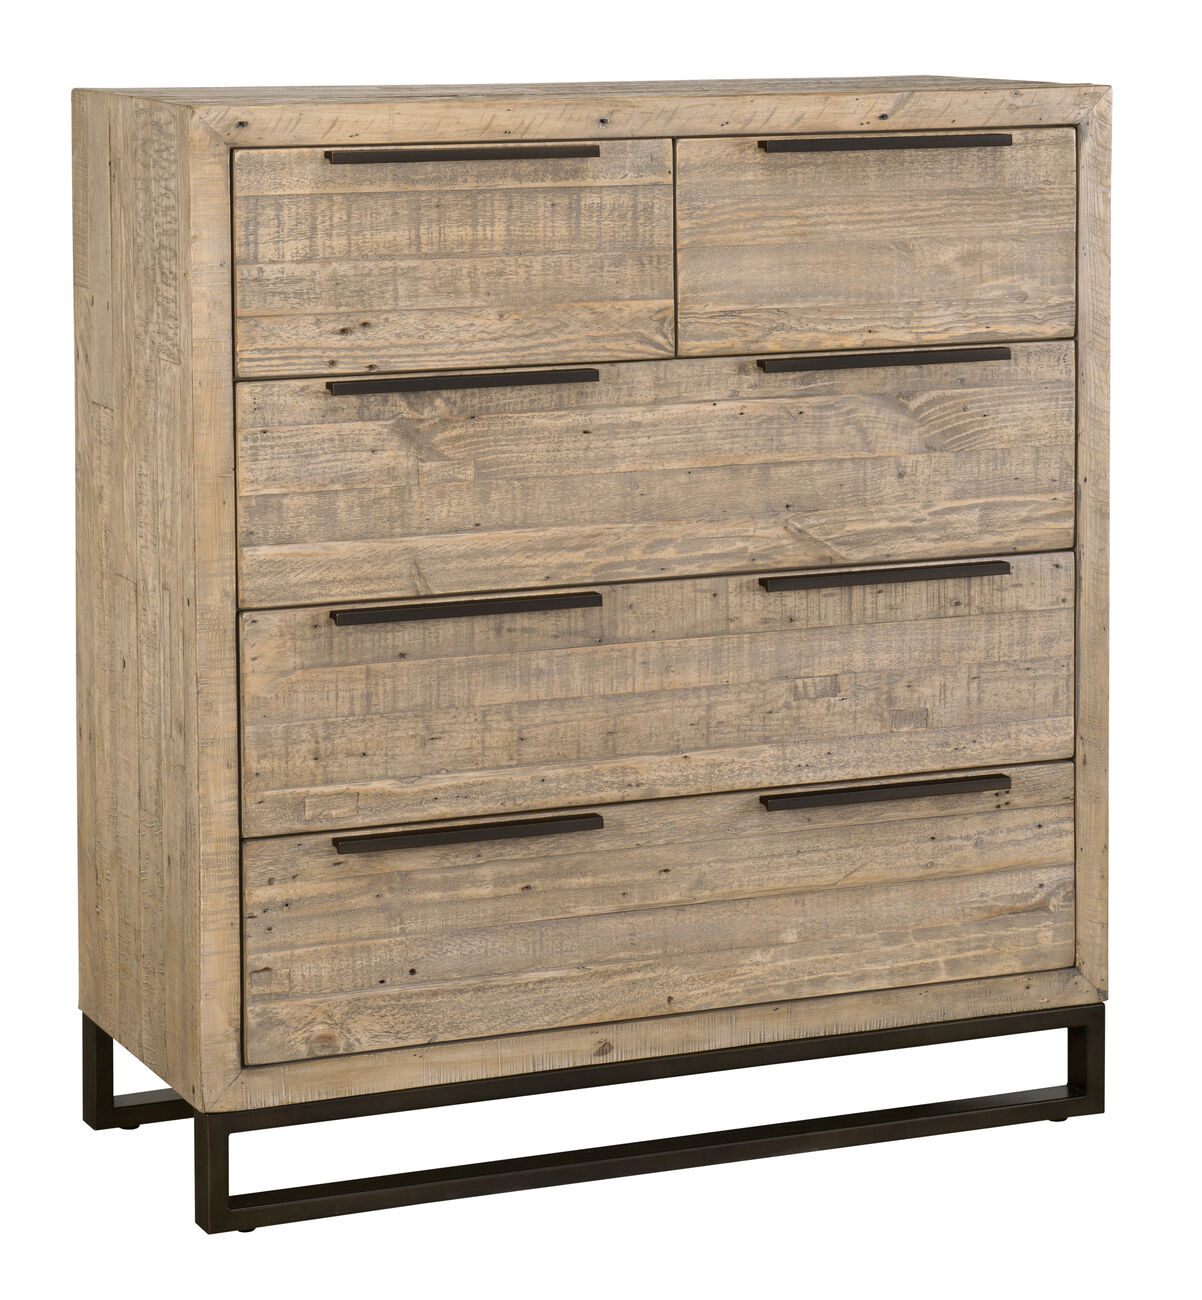 Wooden 5 Drawer Dresser with Bar Handles and Metal Sled Base, Taupe Brown